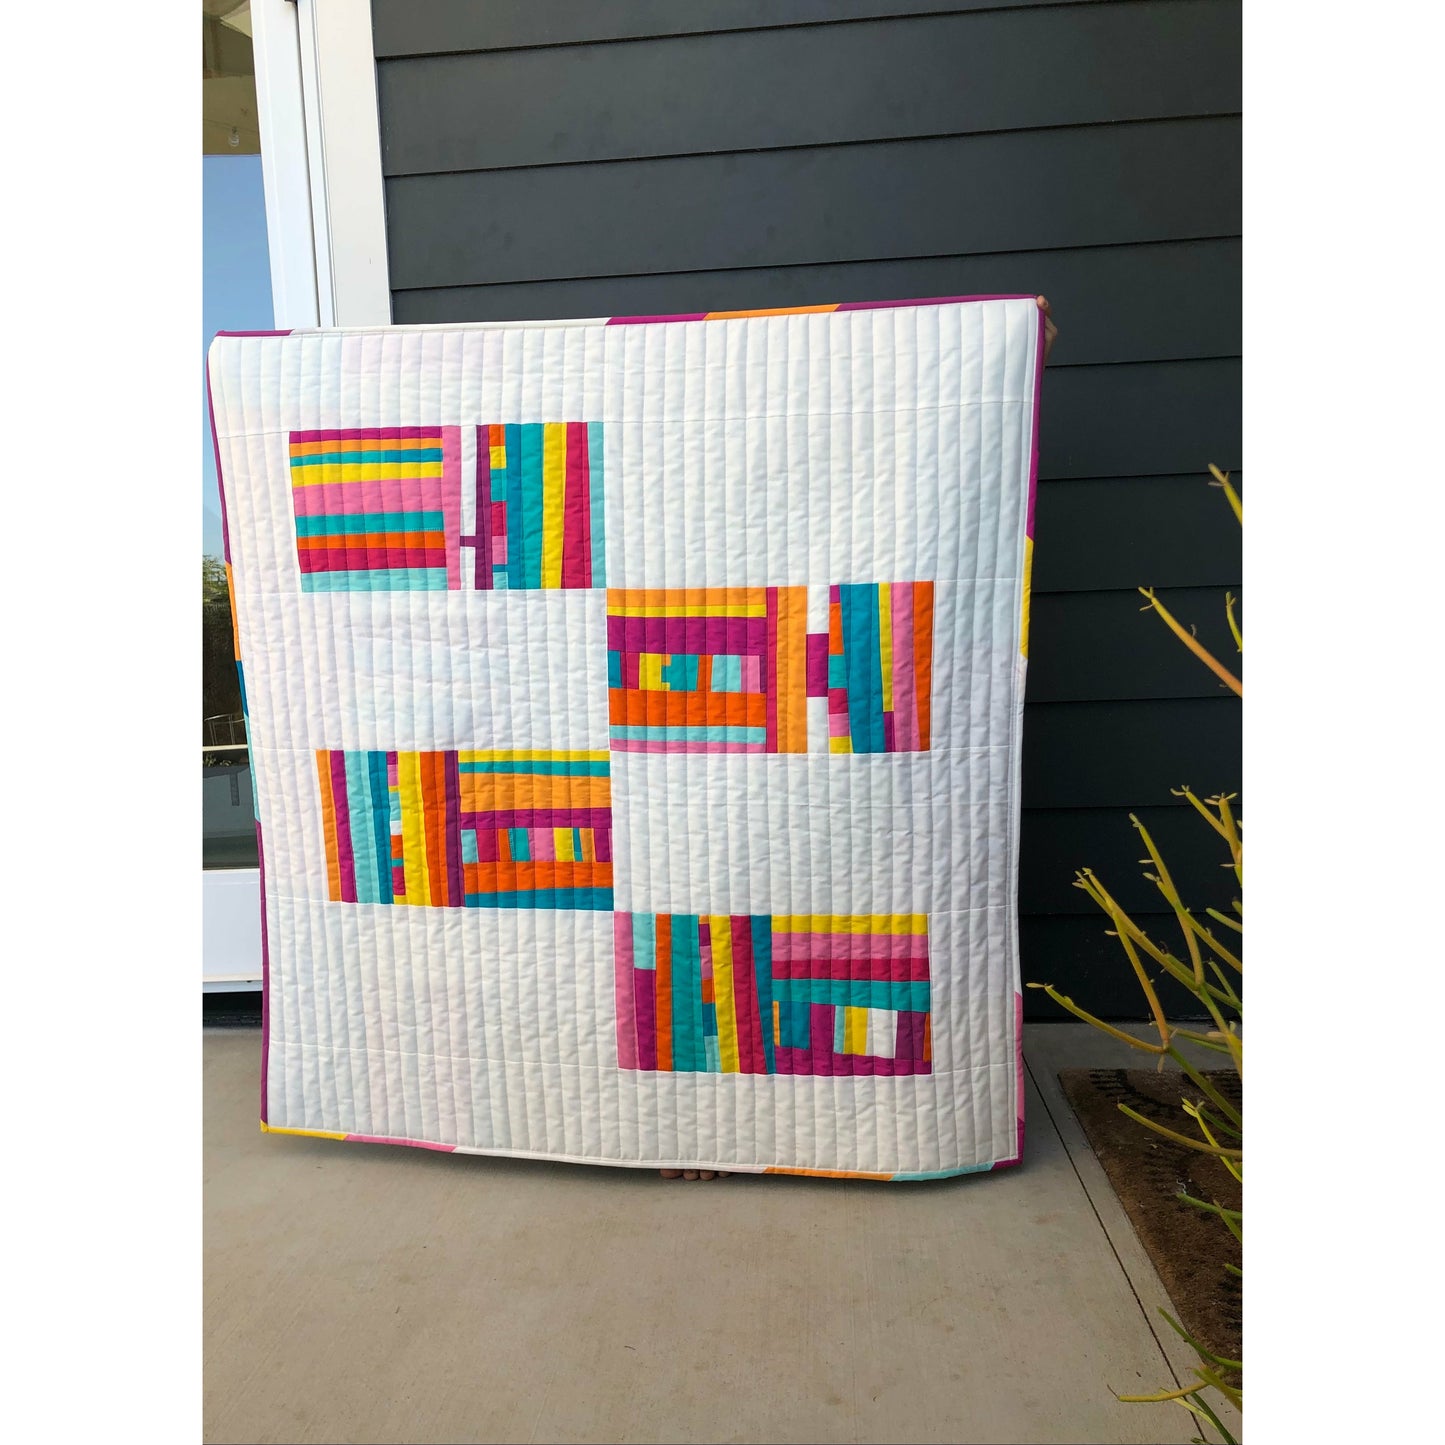 Baby/Crib Small Lap Quilt- Modern, Improv, Handmade, One of a Kind